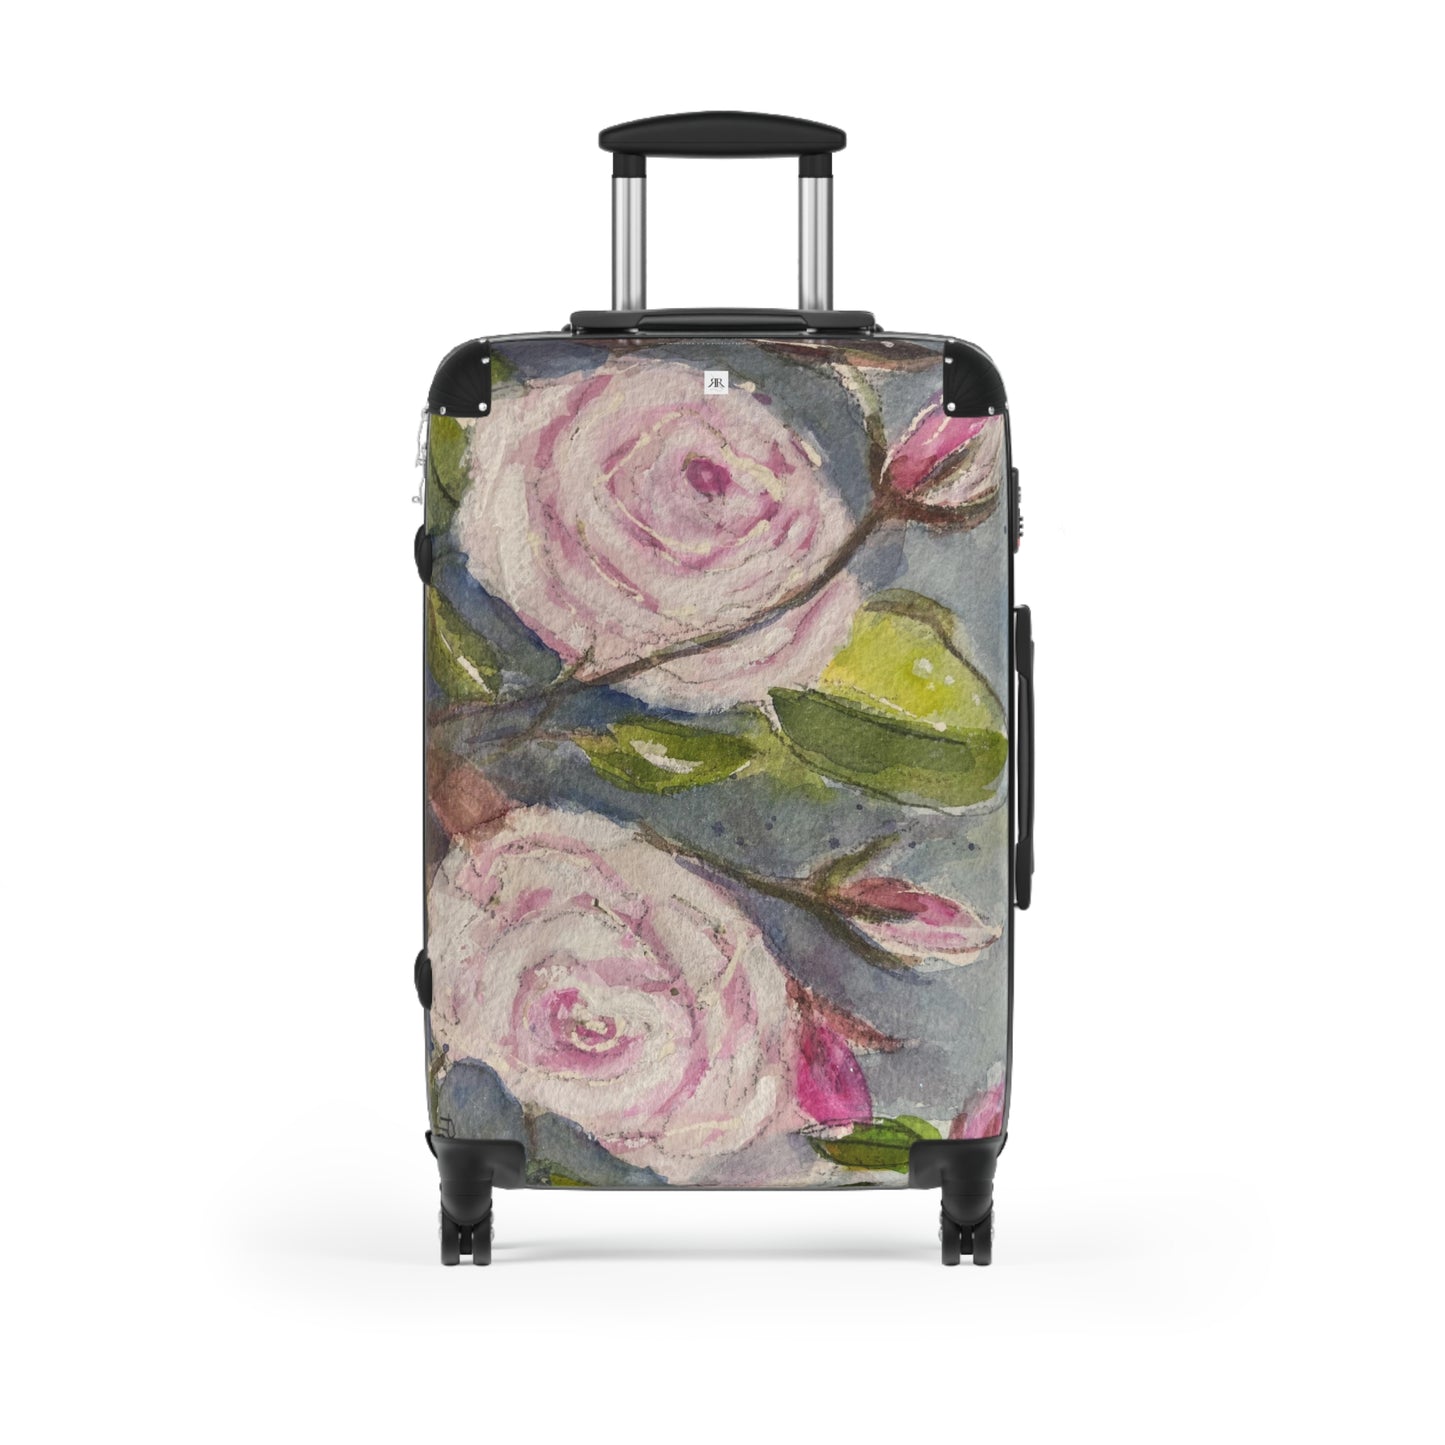 Fluffy White Roses Carry on Suitcase